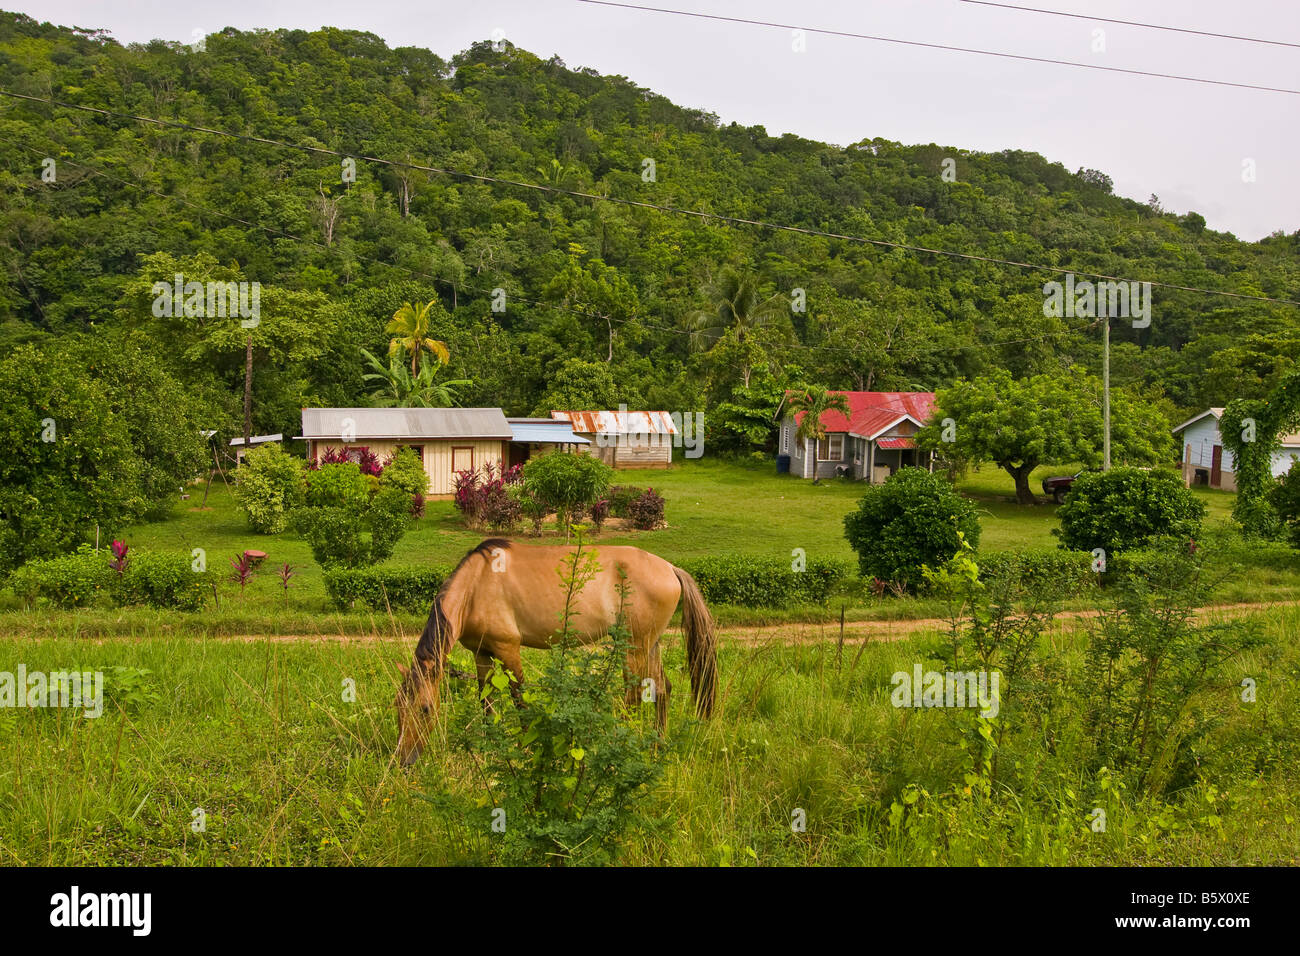 CAYO DISTRICT, BELIZE - Rural homes and horse grazing near San Antonio village. Stock Photo